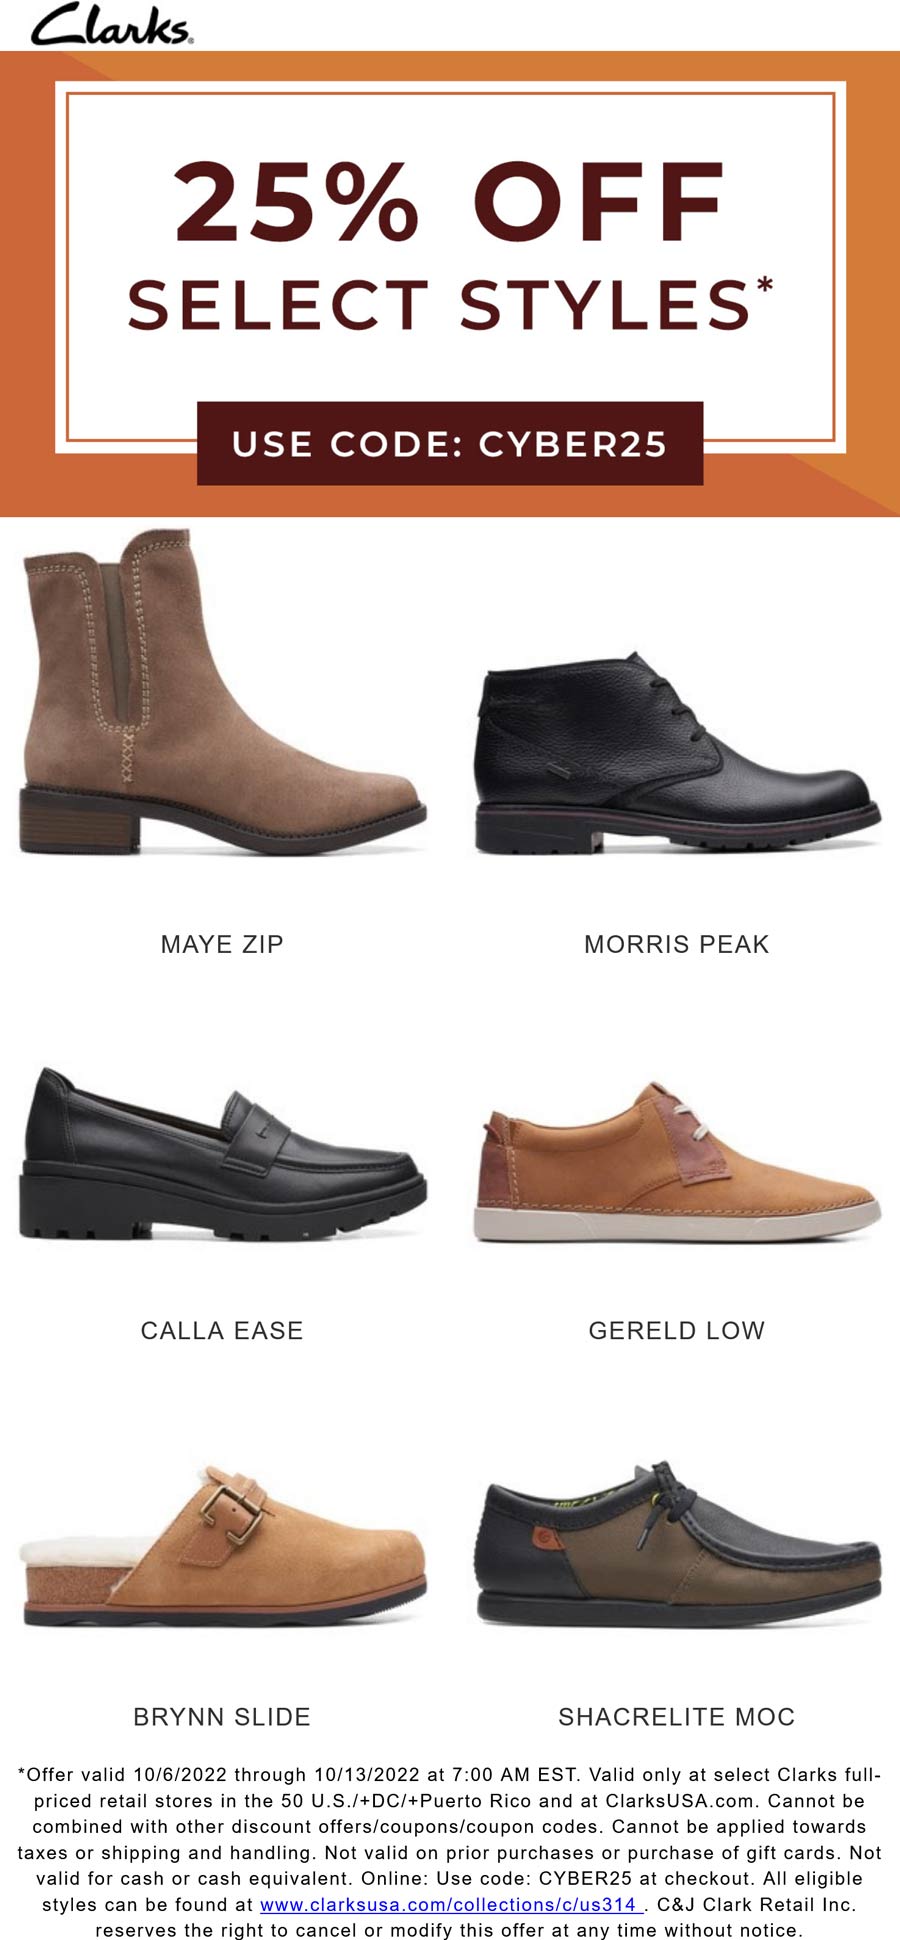 Clarks coupons & promo code for [November 2022]